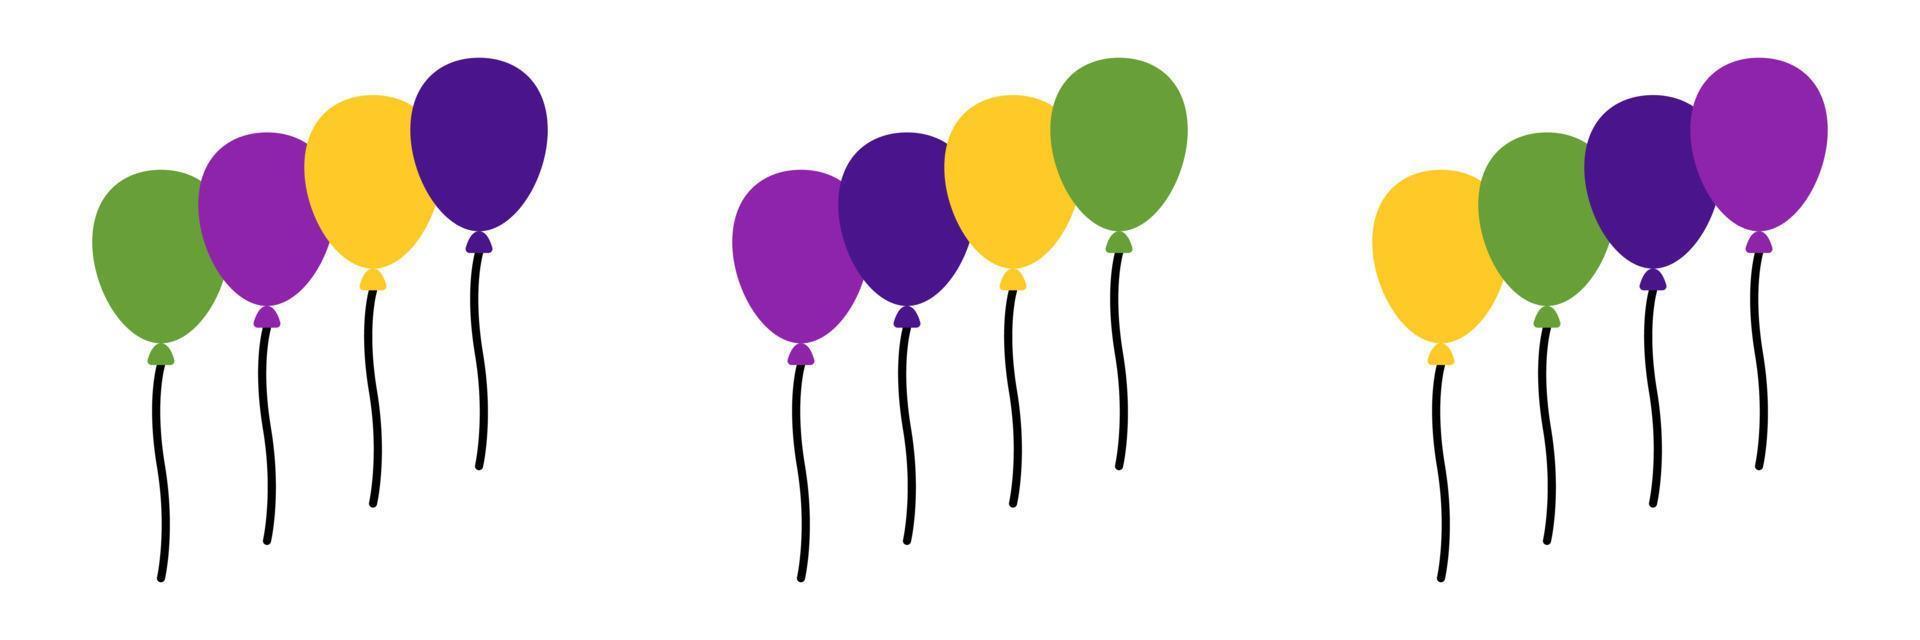 Balloons in flat style isolated vector